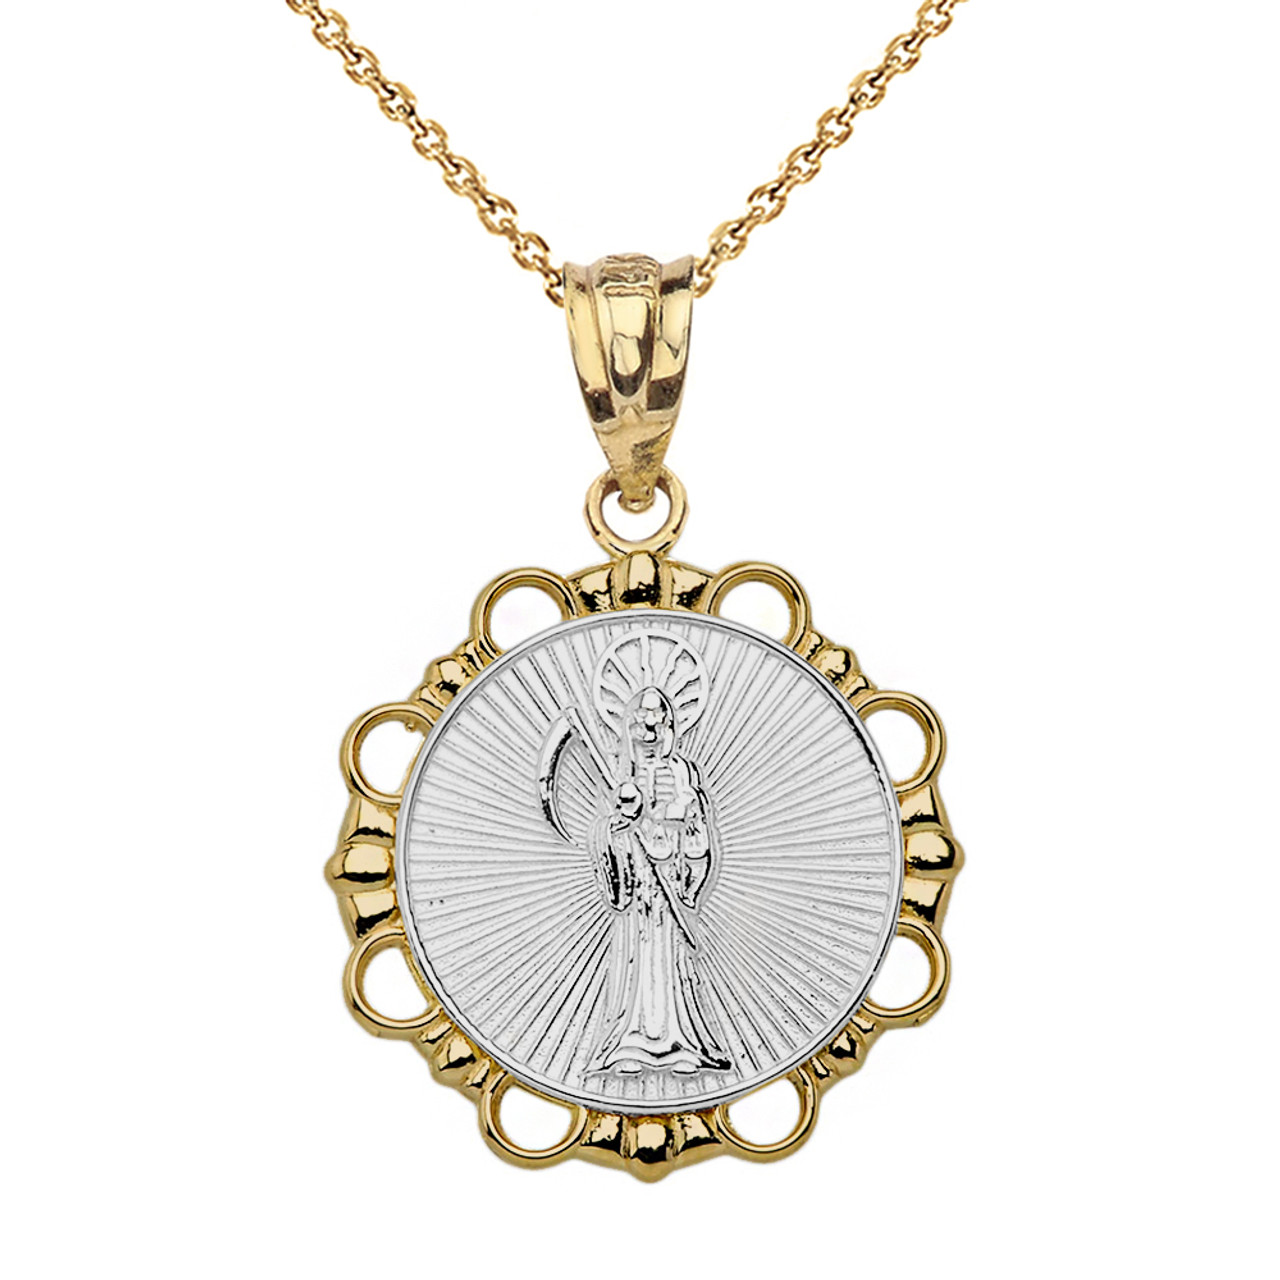 Solid Two Tone Yellow Gold Round Santa Muerte Pendant Necklace